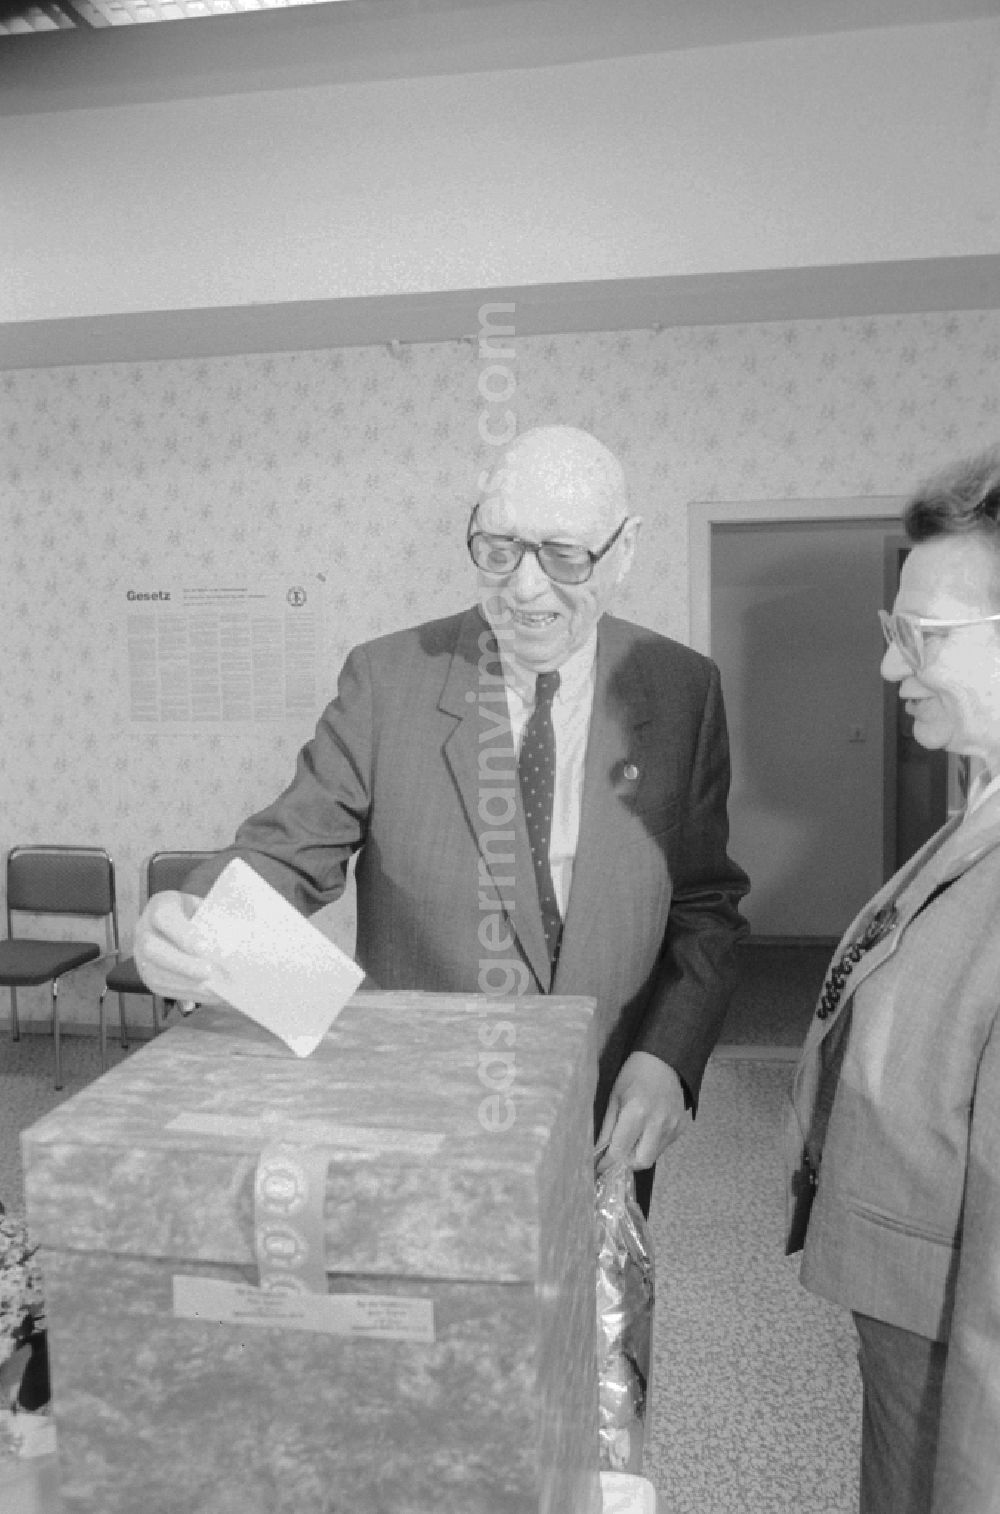 GDR picture archive: Berlin - Heinrich Homann (1911 - 1994), Chairman of the National Democratic Party of Germany (NDPD), in its vote at the last local elections in the GDR in Berlin, the former capital of the GDR, the German Democratic Republic